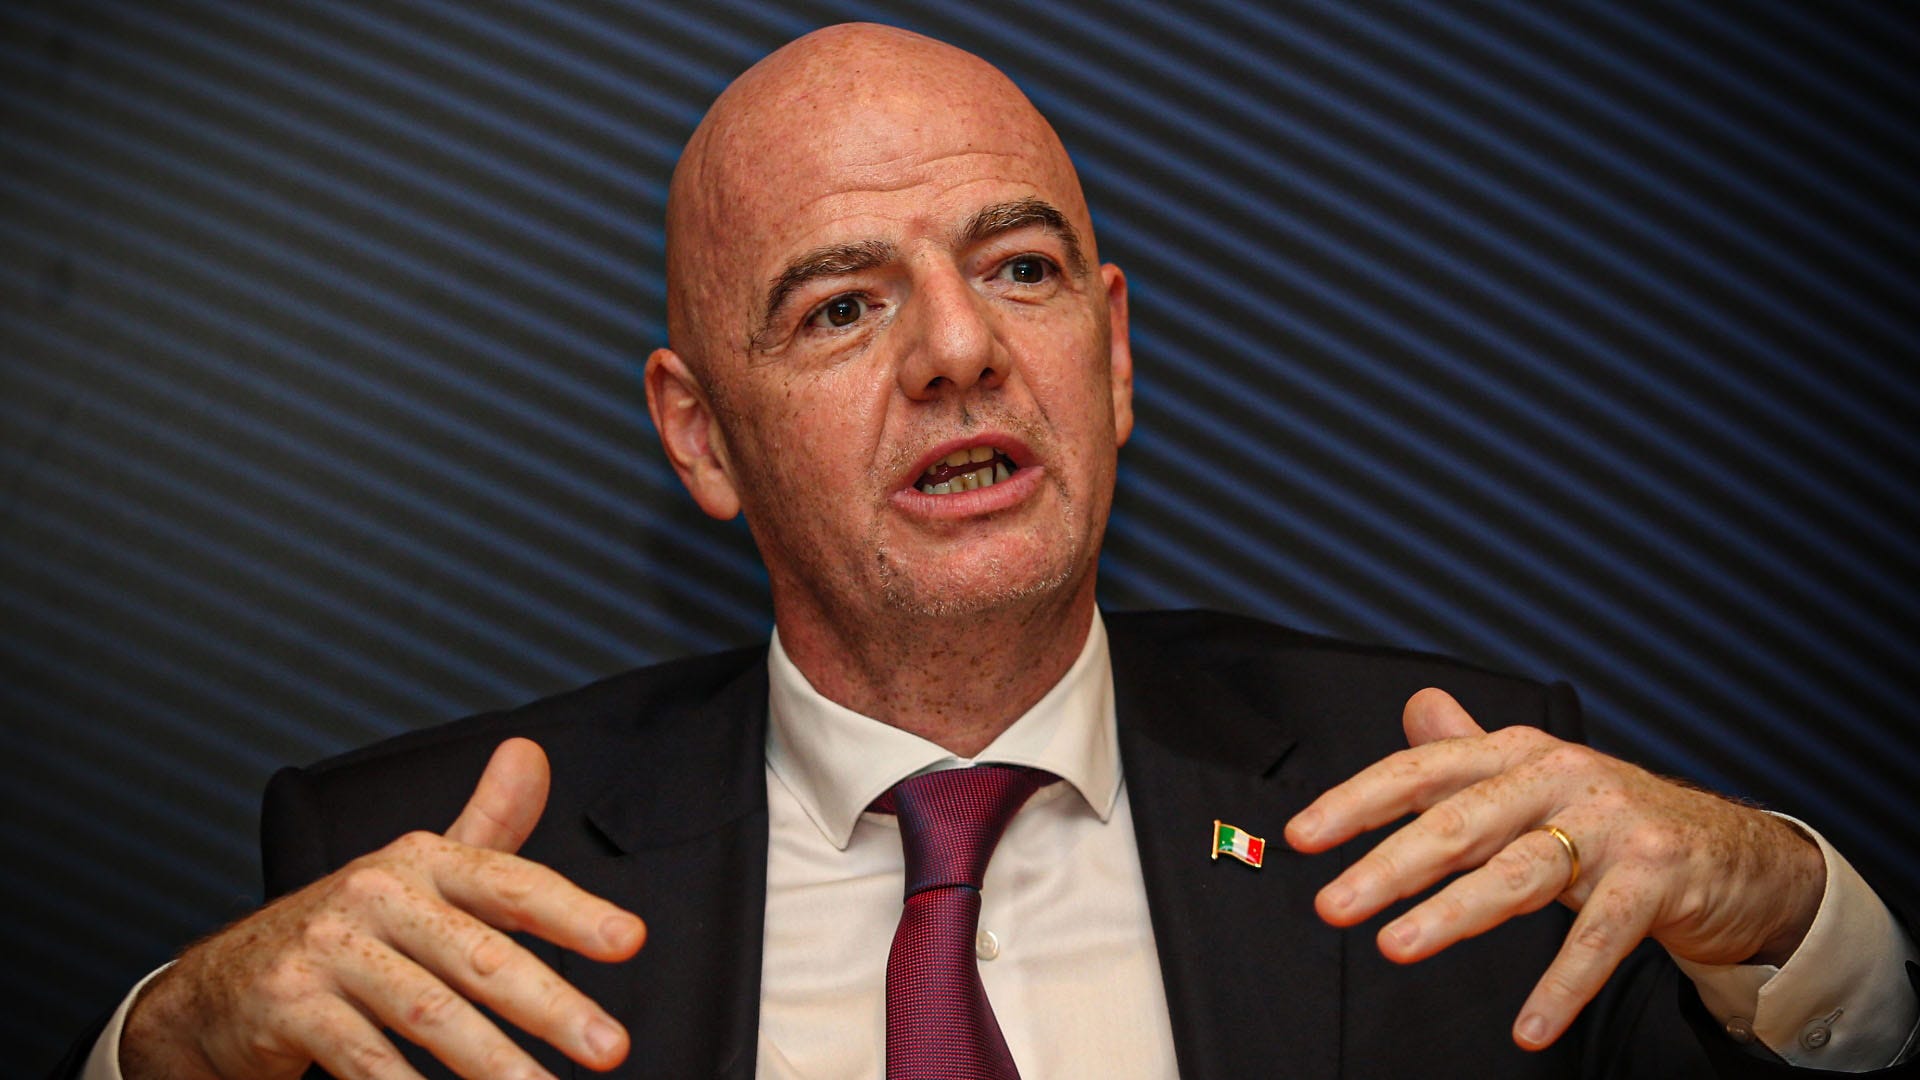 Infantino's call to 'focus on the football' a crass abdication of FIFA's  accountability for migrant worker abuses - Amnesty International